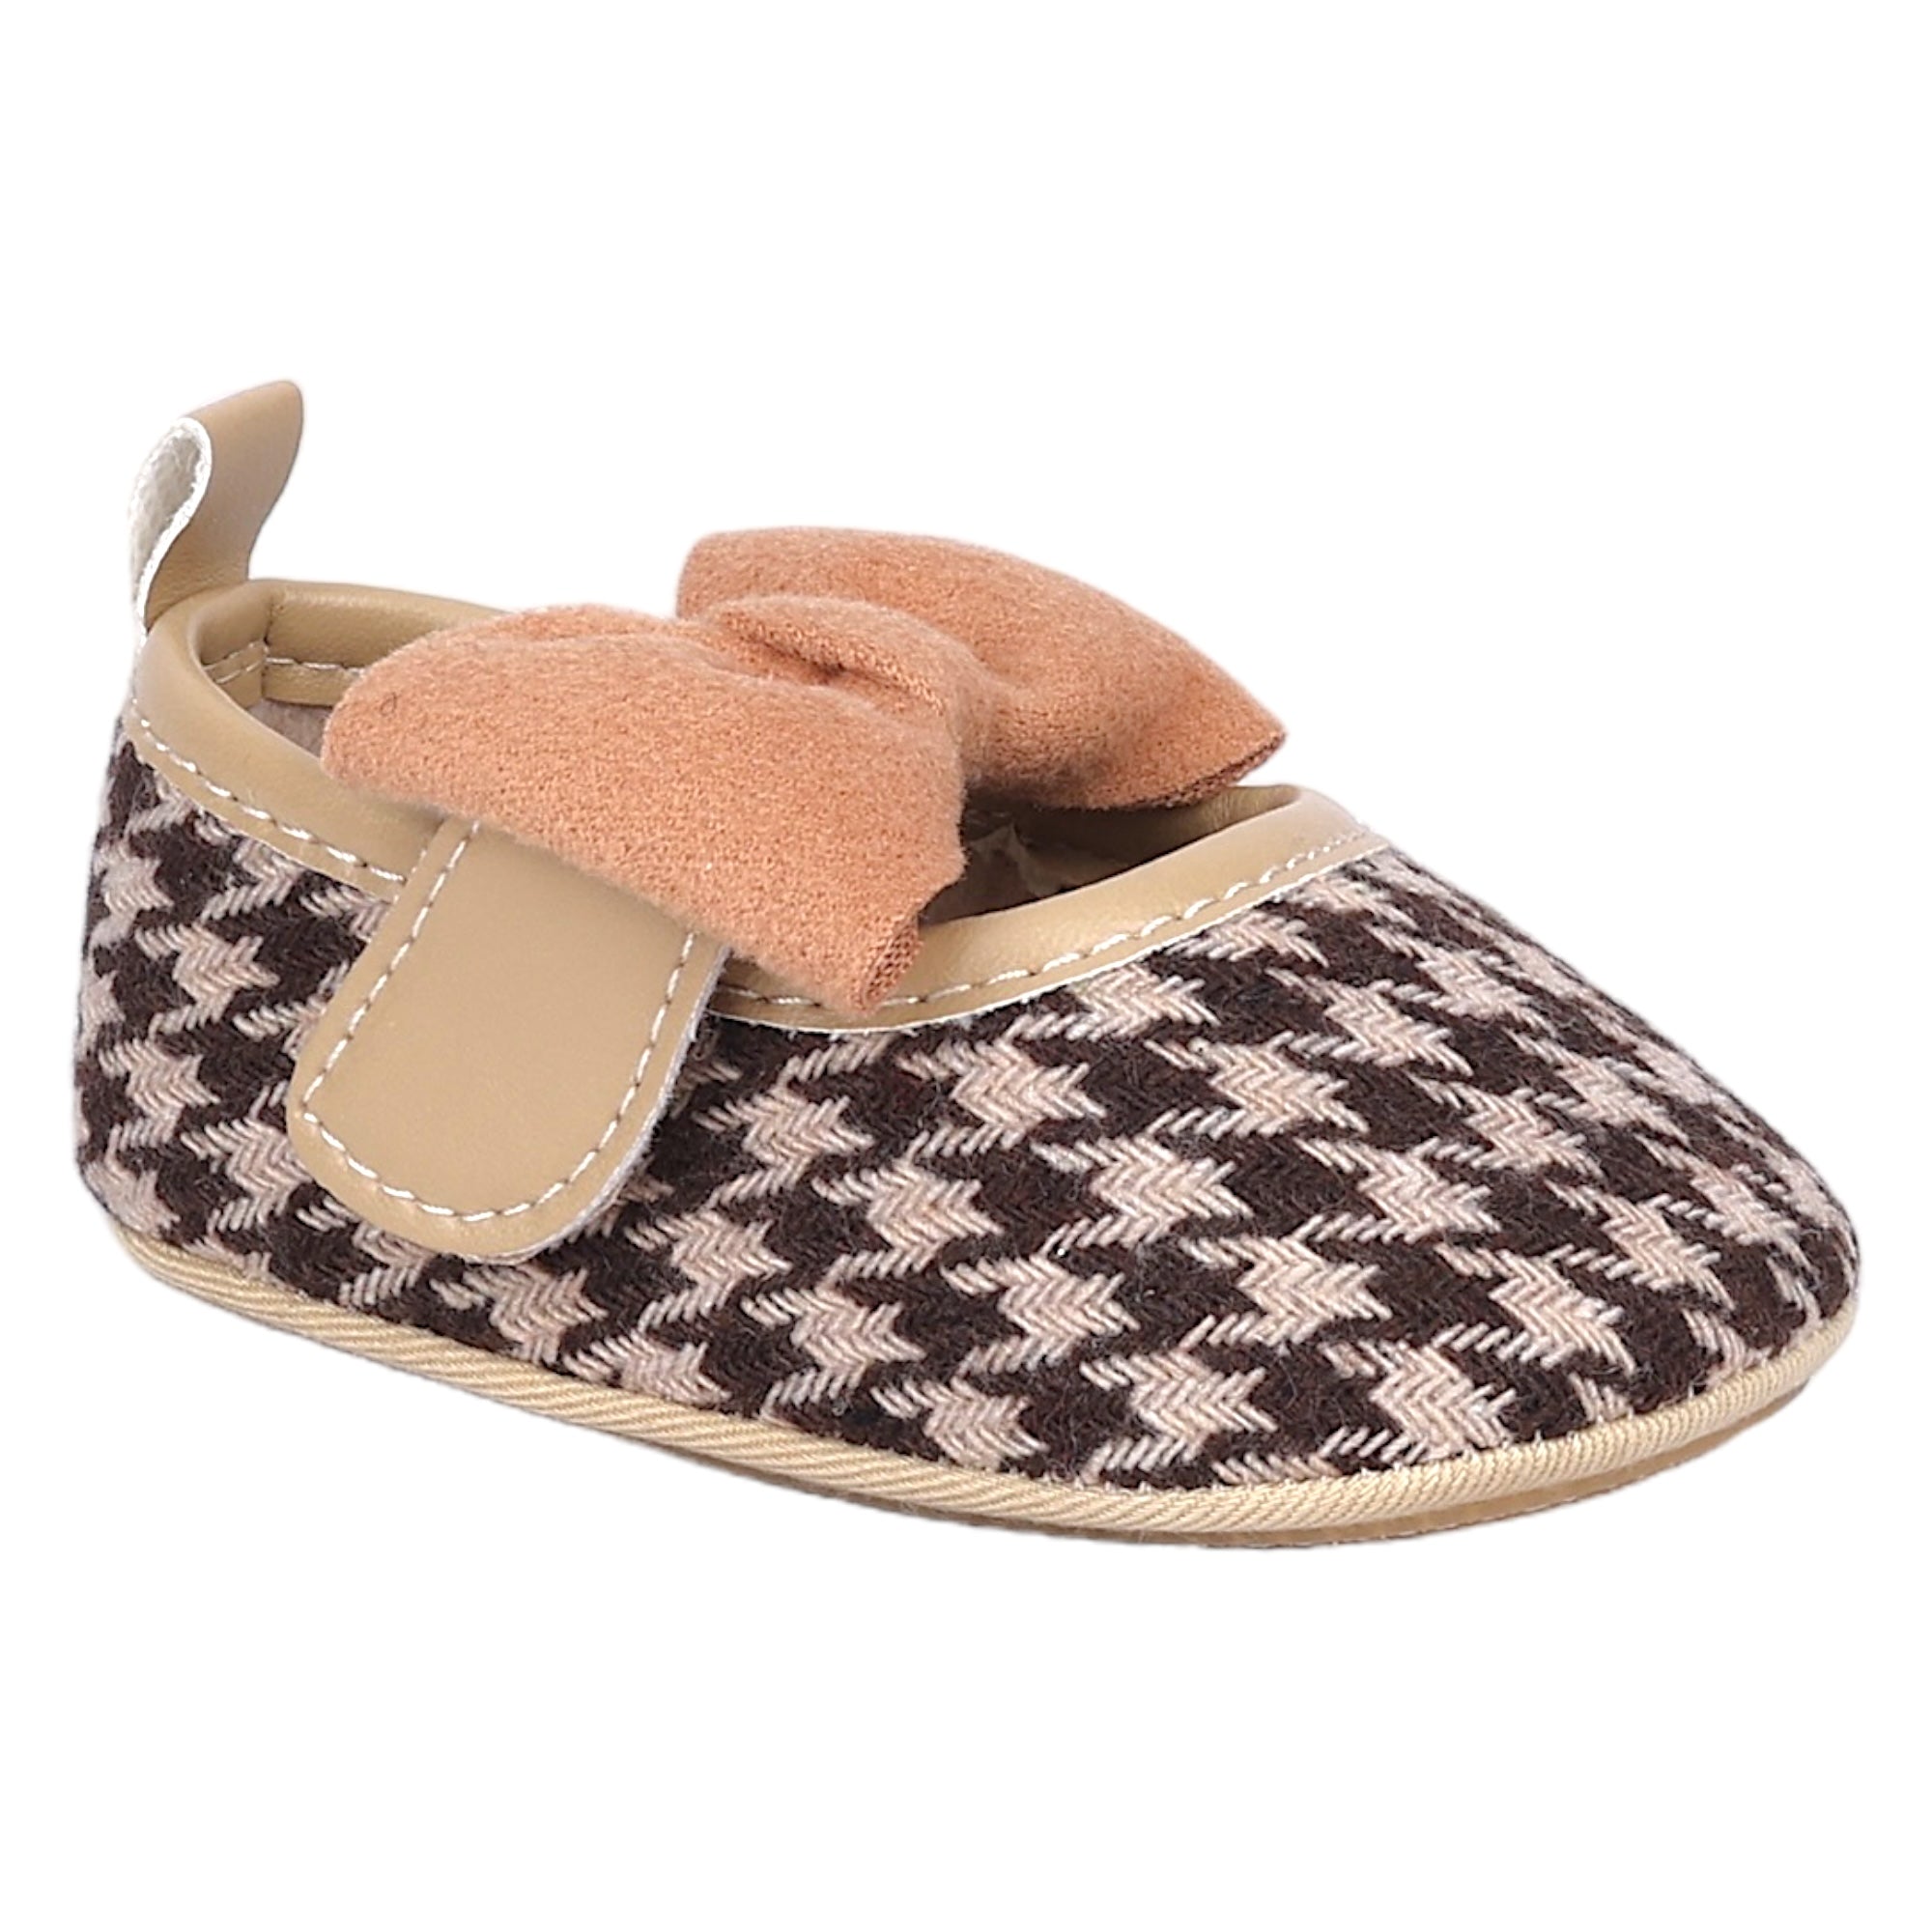 Baby Moo Houndstooth Print with Bow Velcro Strap Anti-Skid Ballerina Booties - Brown